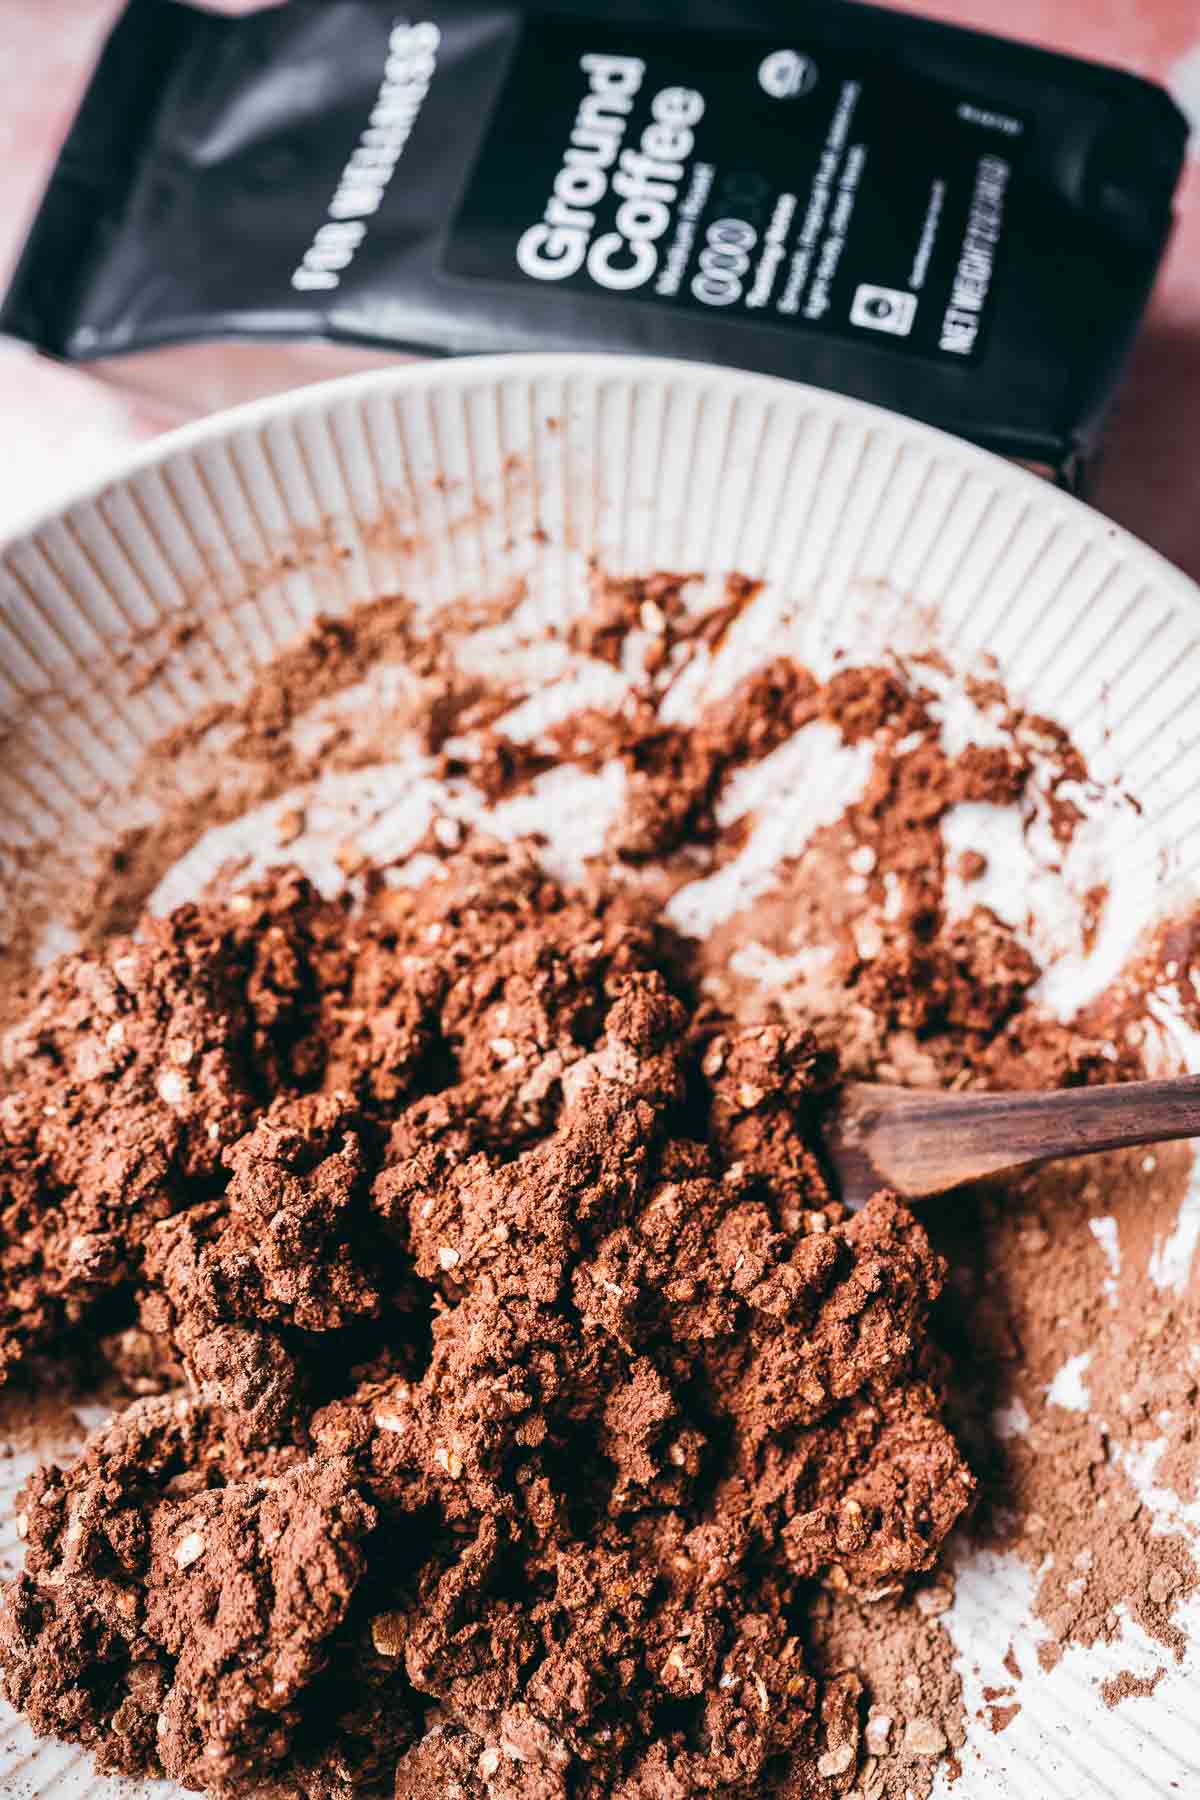 A large tan ceramic bowl filled with a chocolate protein bar batter.